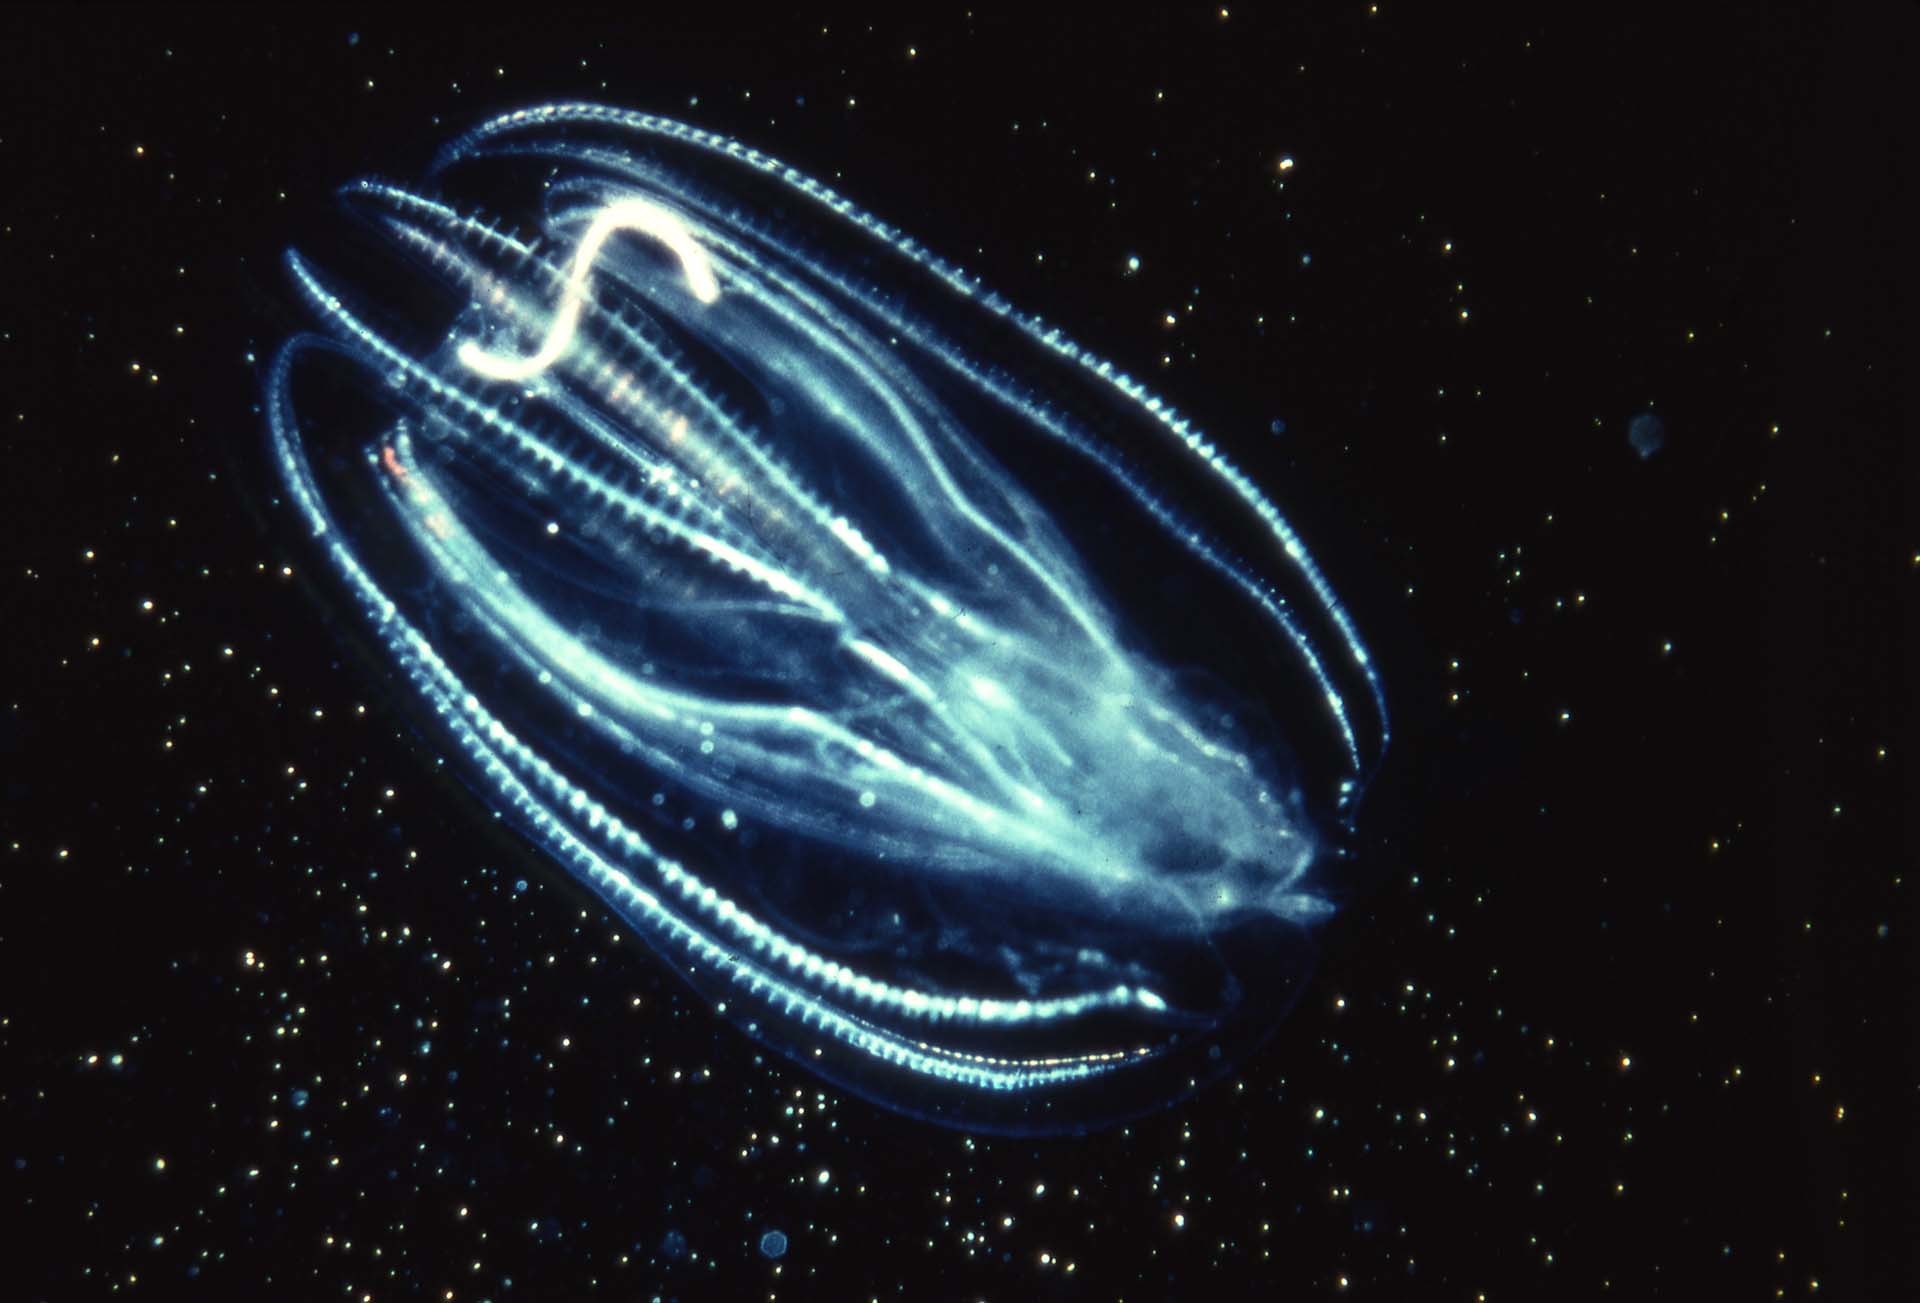 Close encounters with jellyfish in LI waters - Newsday